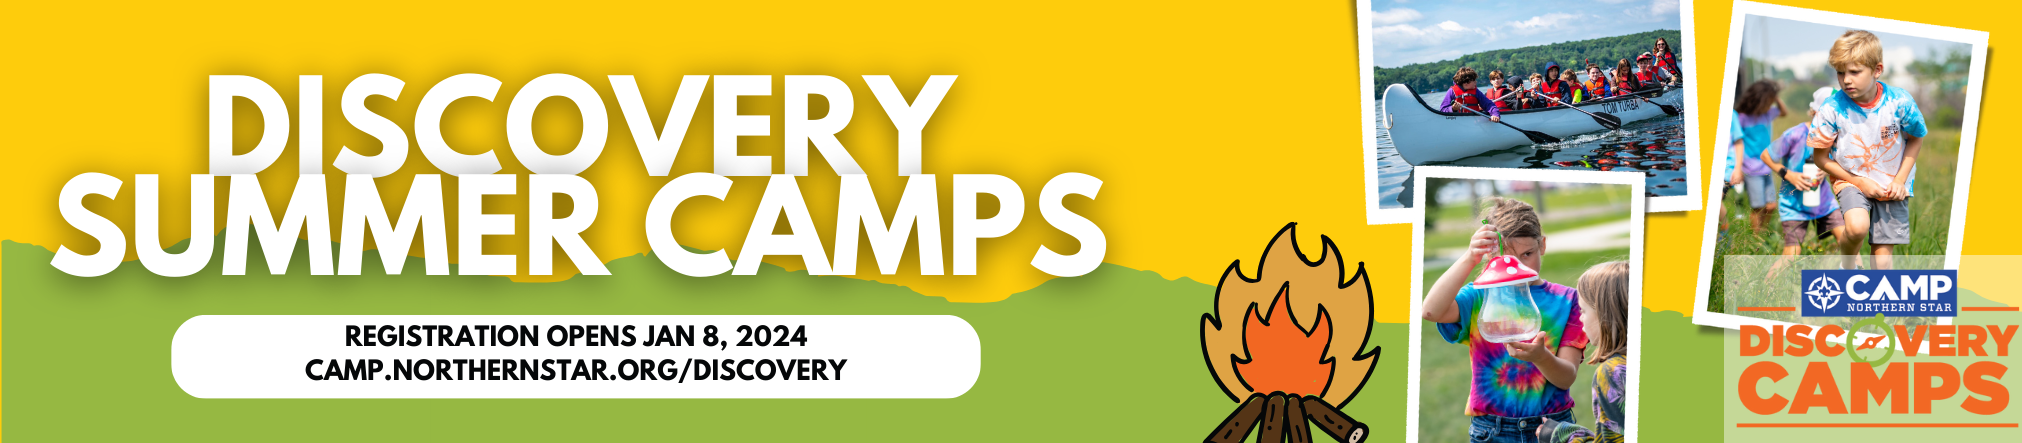 Discovery Summer Camps: reservations open now